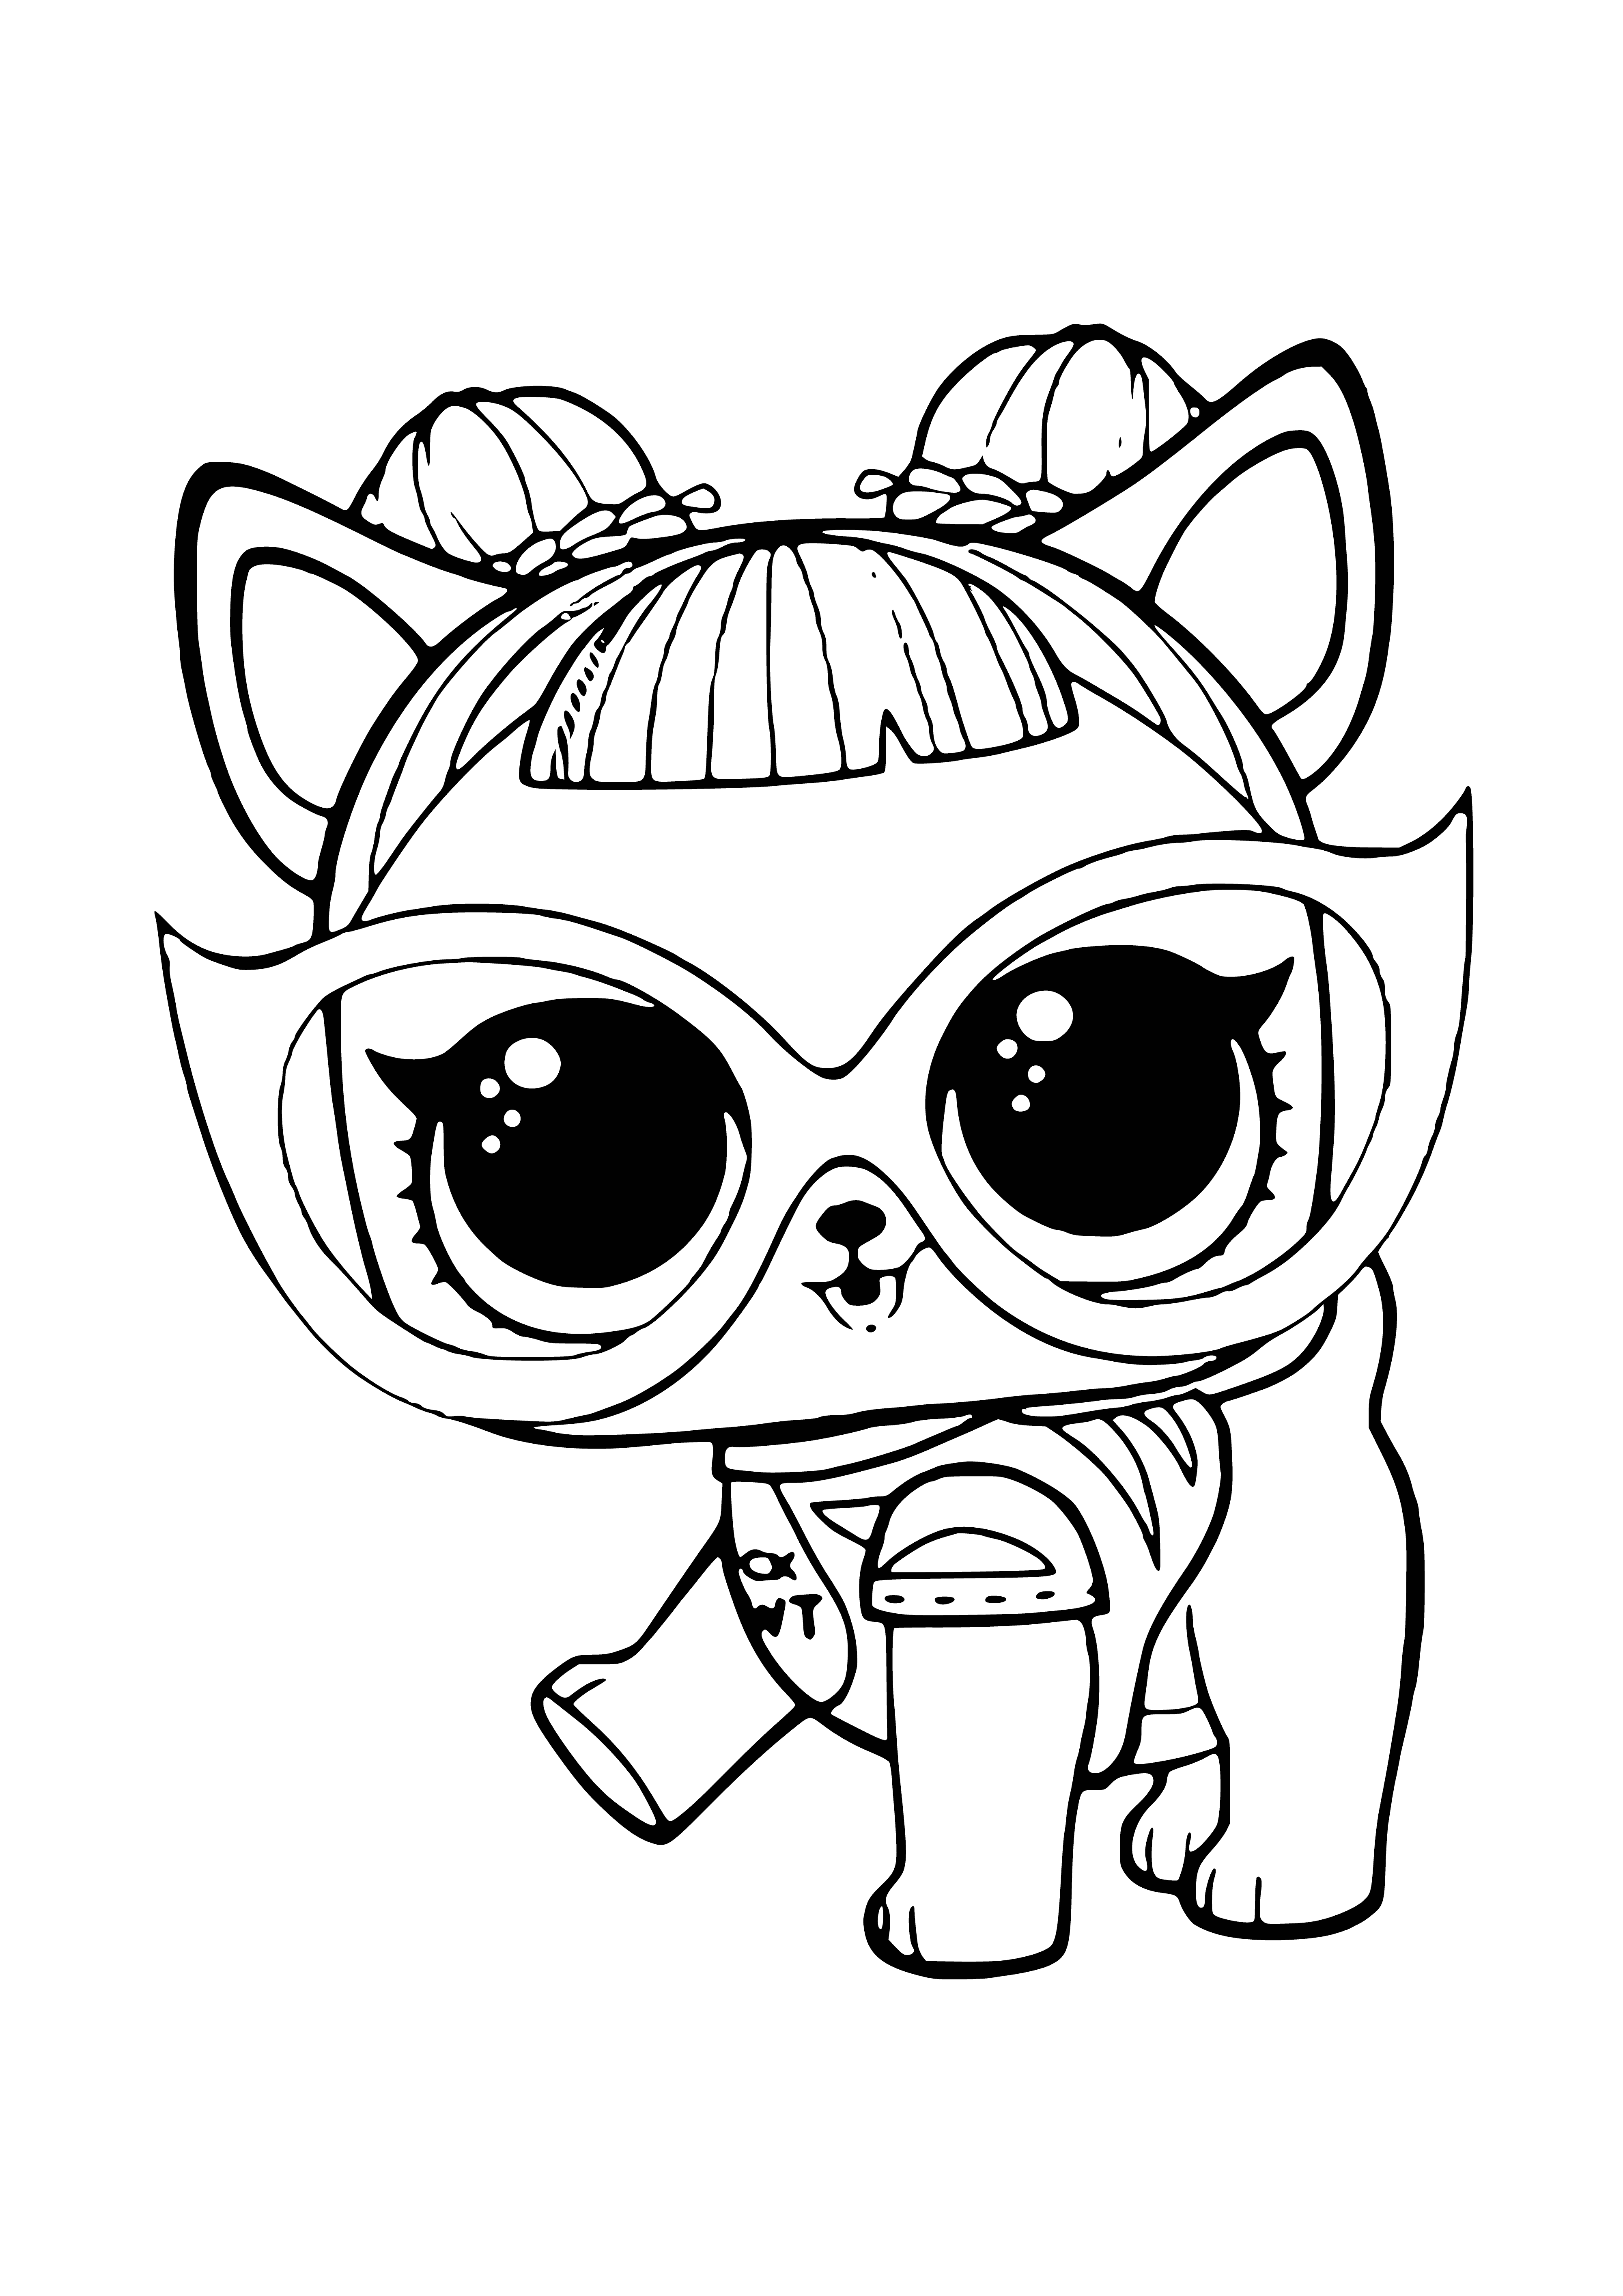 Lol pet Puppy coloring page